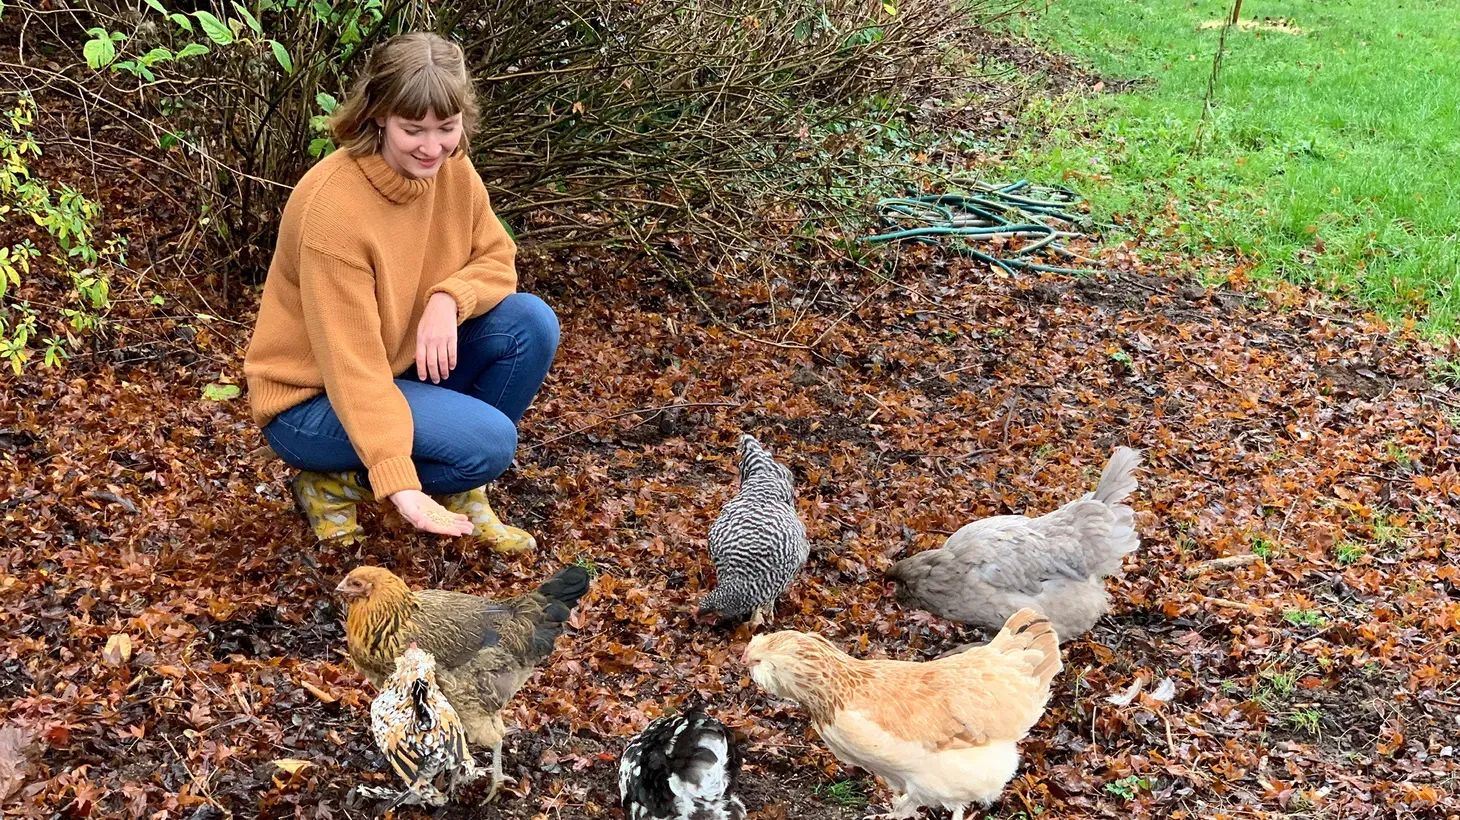 Raising chickens runs in Tove Danovich's family. Her great-grandmother received a coop from her husband as a wedding gift.